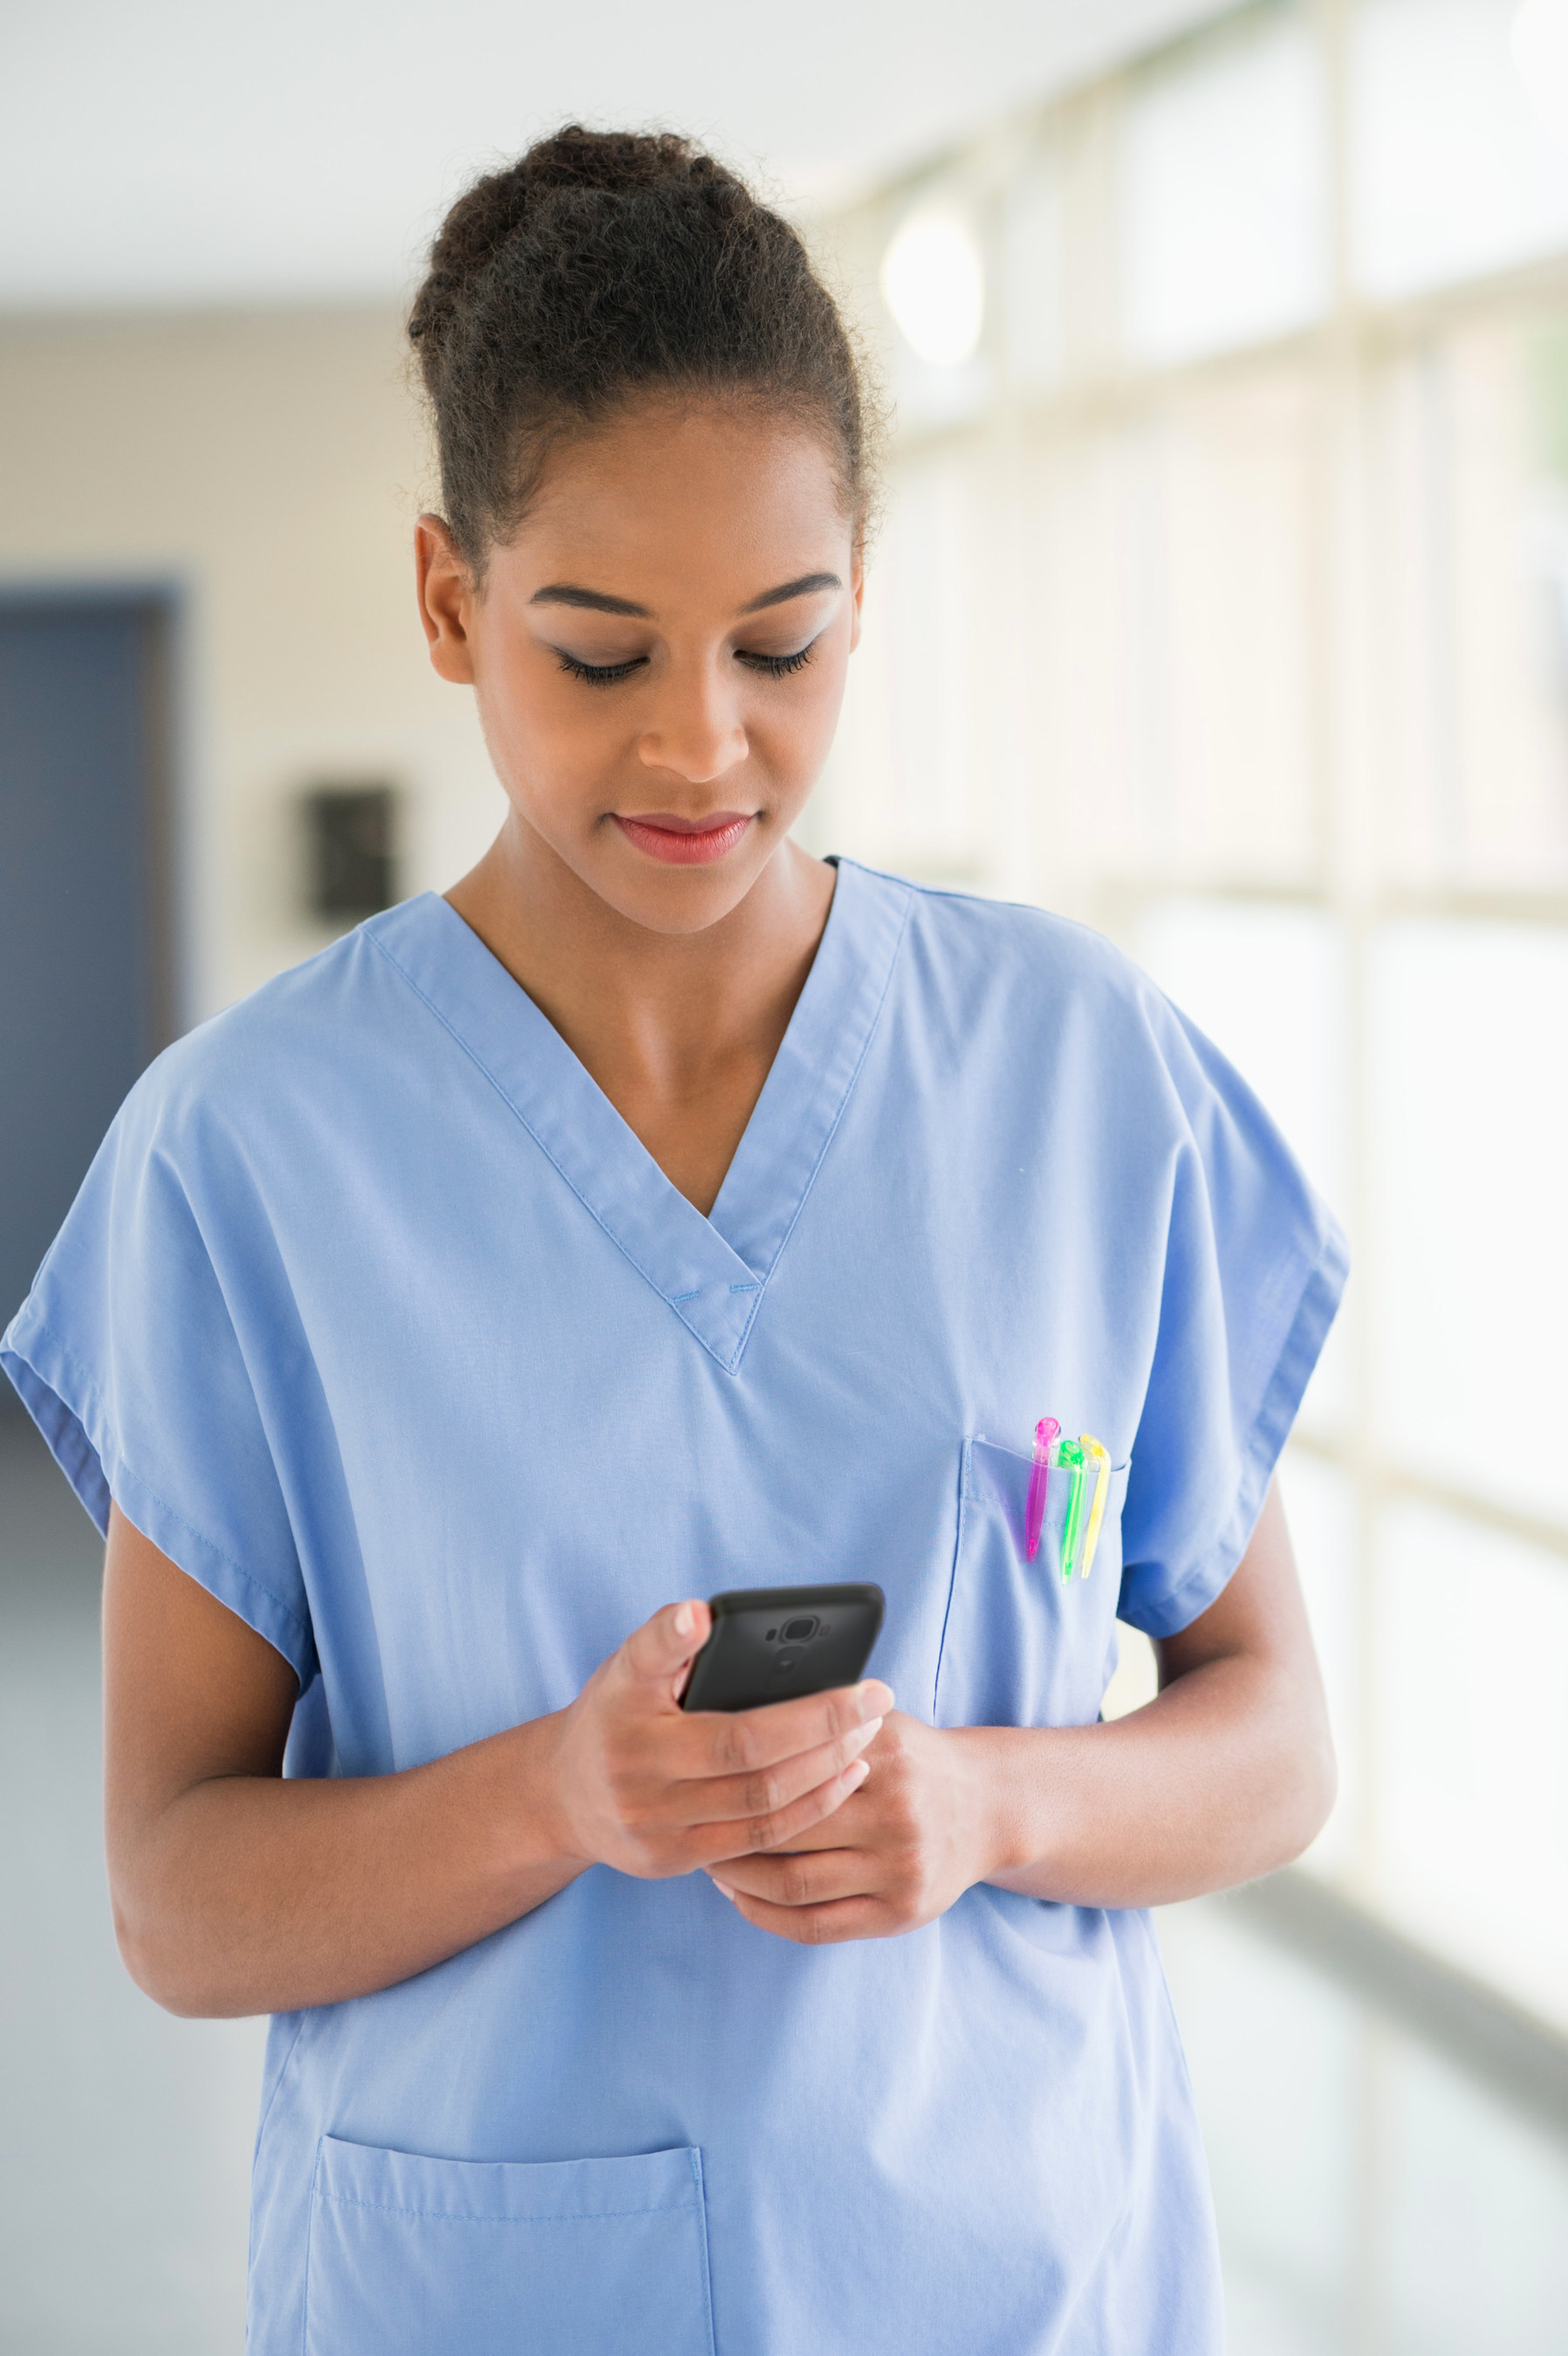 The Philips CareEvent mobile application turns a smartphone into a valuable clinical tool for on-the-go nurses.